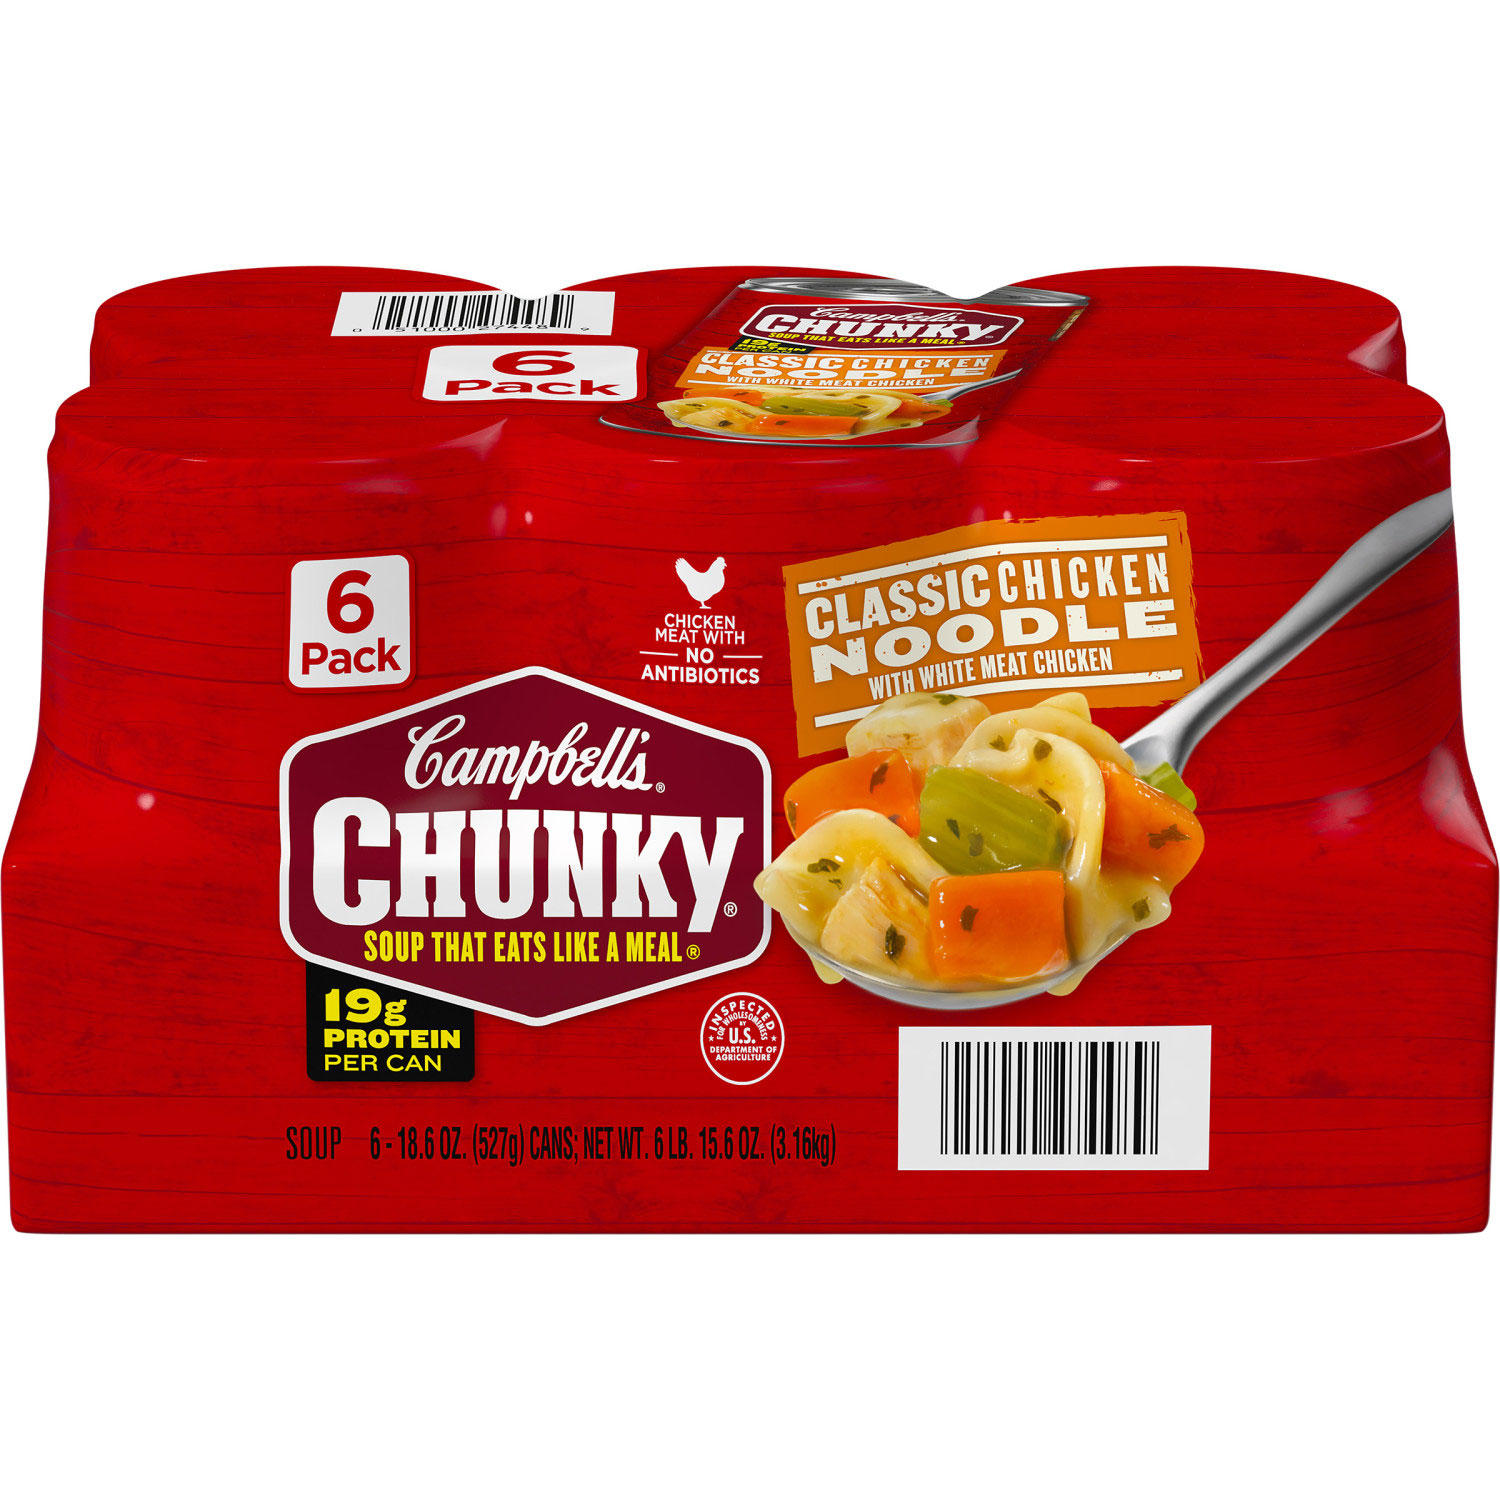 Sam's Club Members: 6-Pack 18.6-Oz Campbell's Chunky Chicken Noodle Soup $9.80 ($1.64 each) + F/S for Plus Members